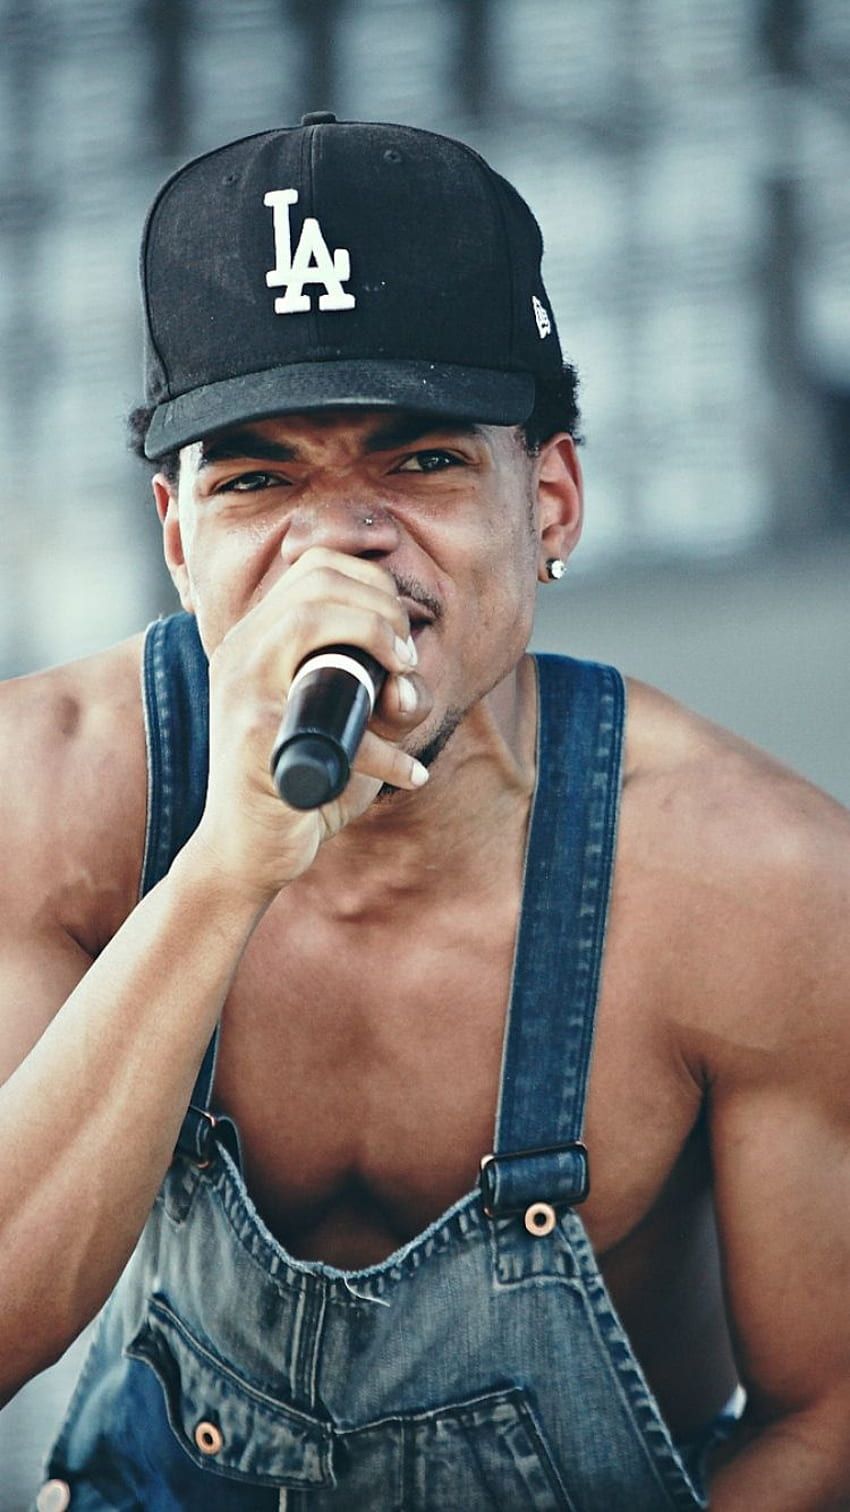 A man wearing an overalls and holding up his microphone - Chance the Rapper